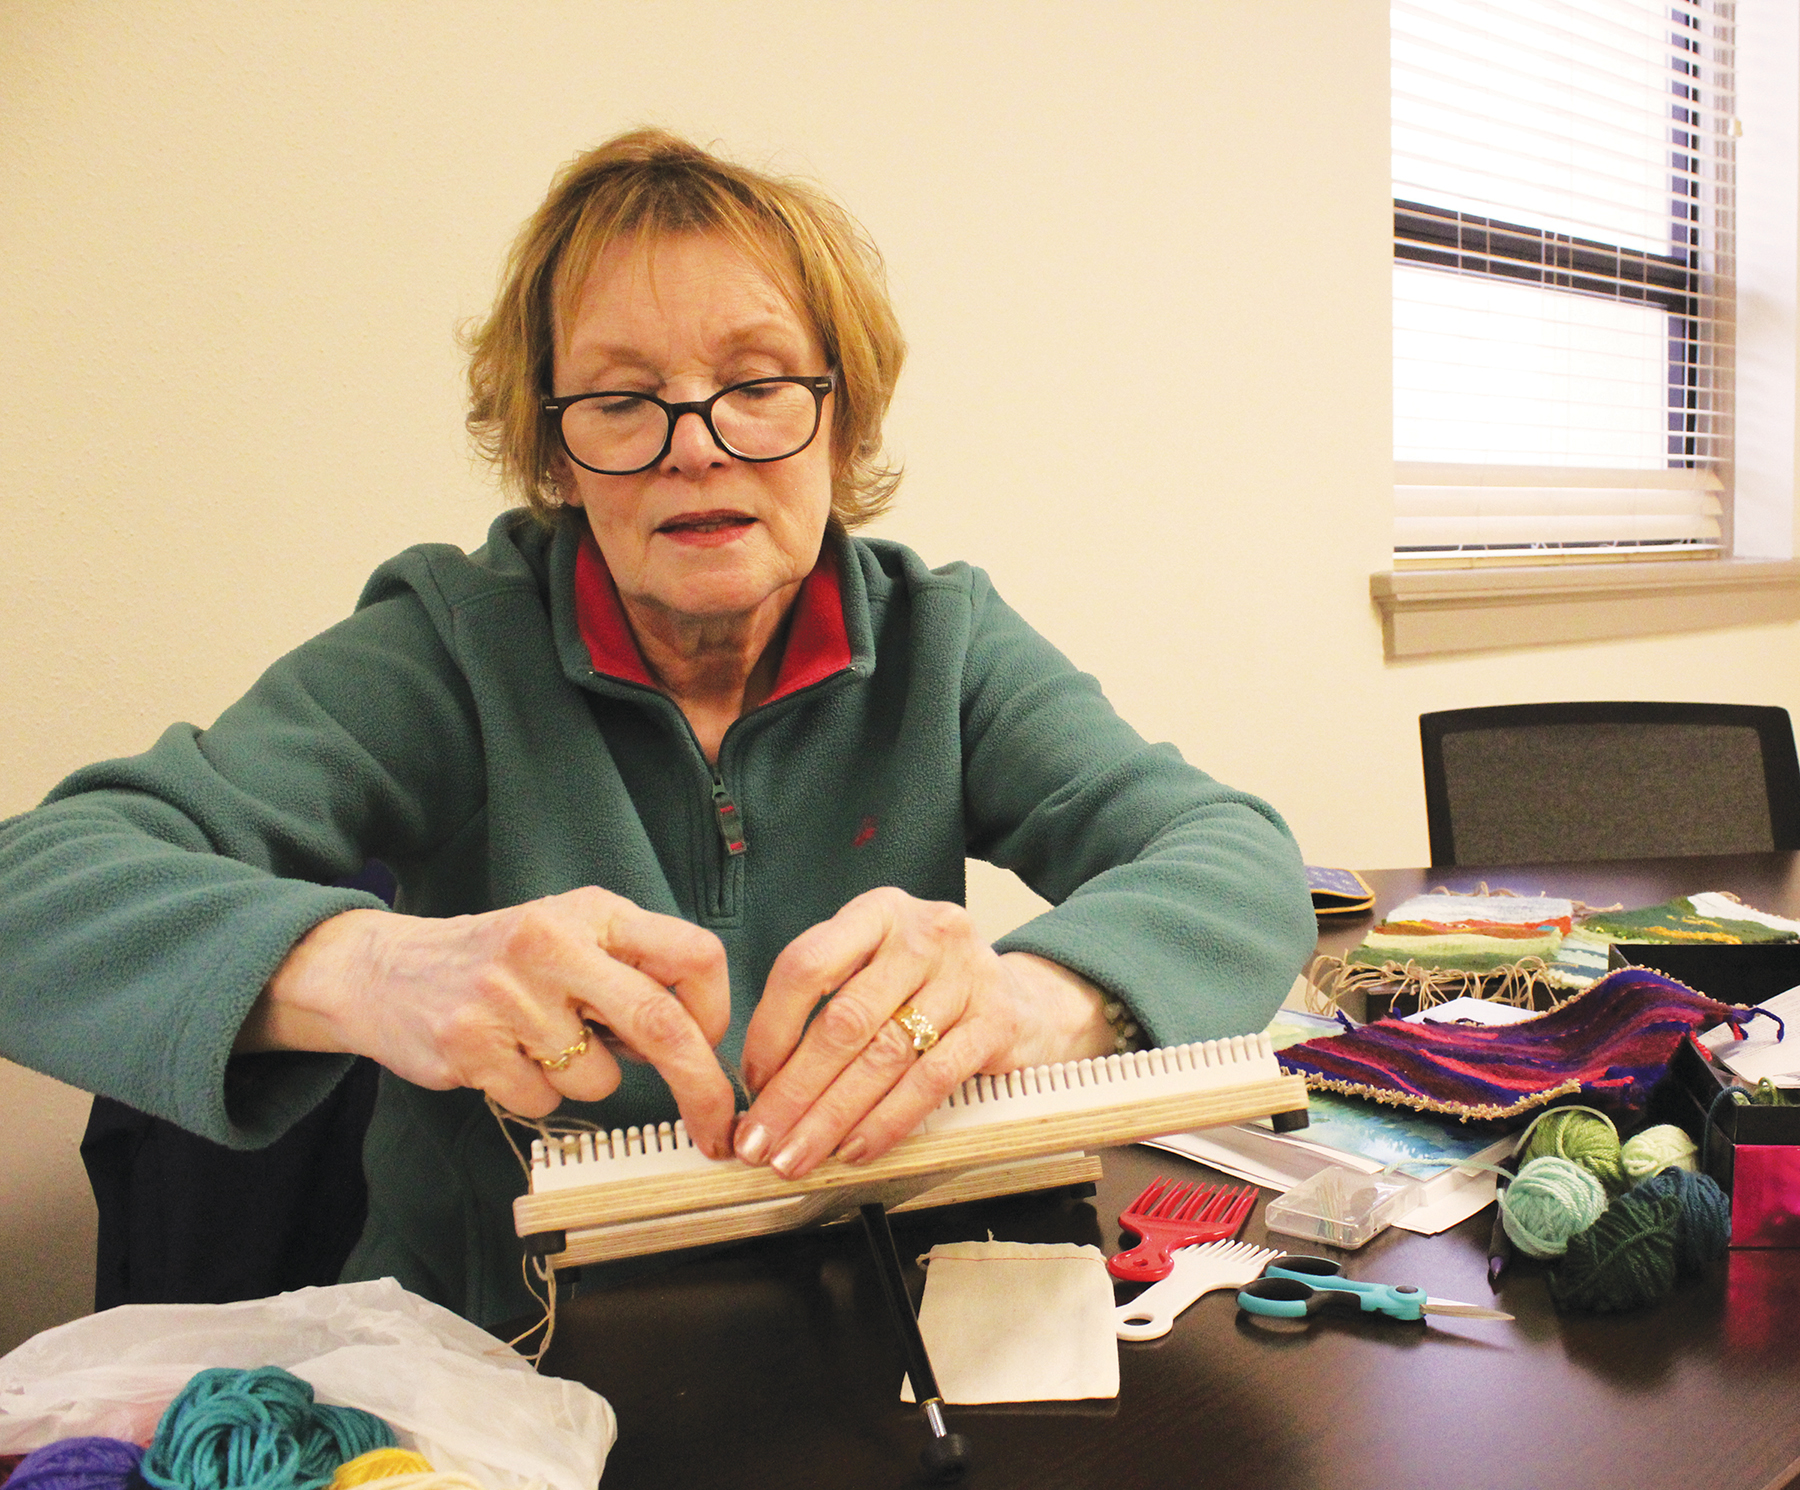 Adult woman working on craft project. 